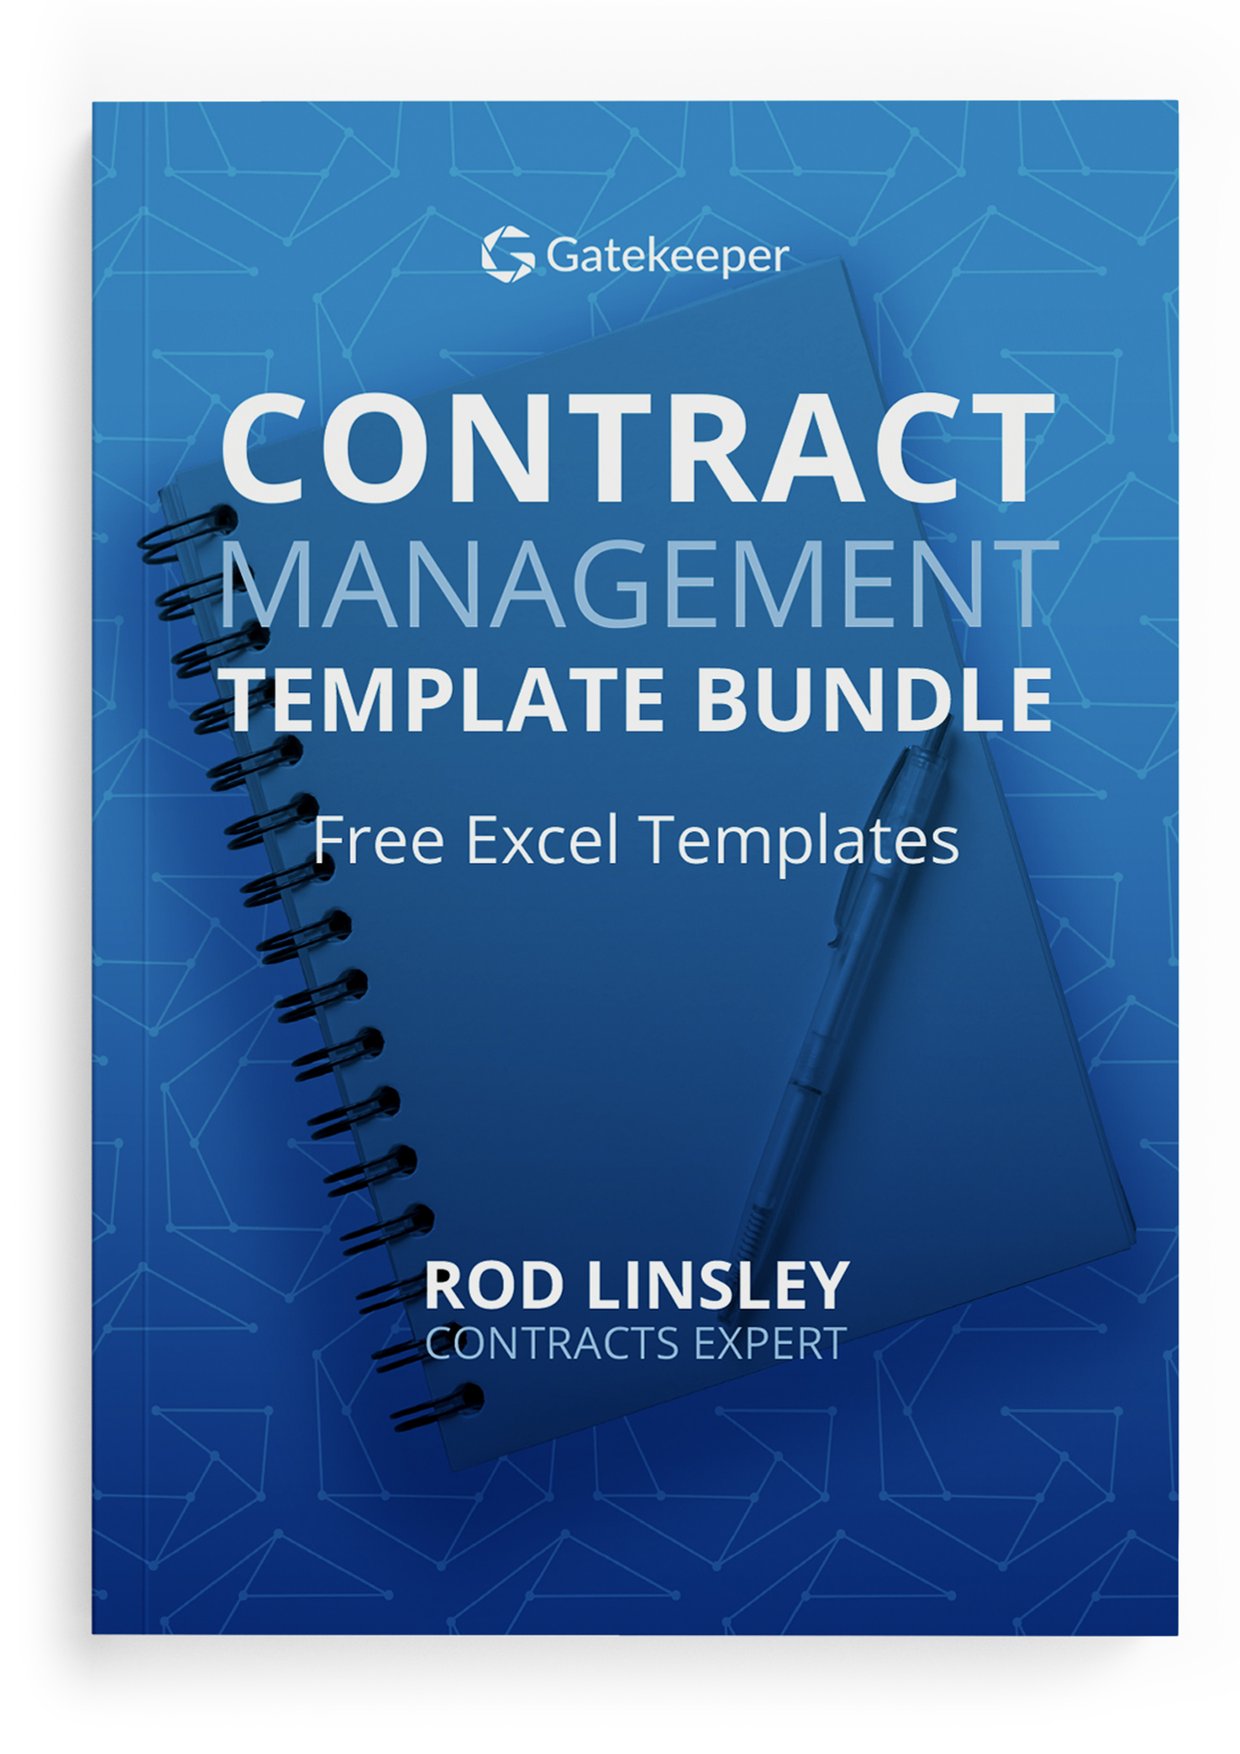 Free Excel Contract Management Templates